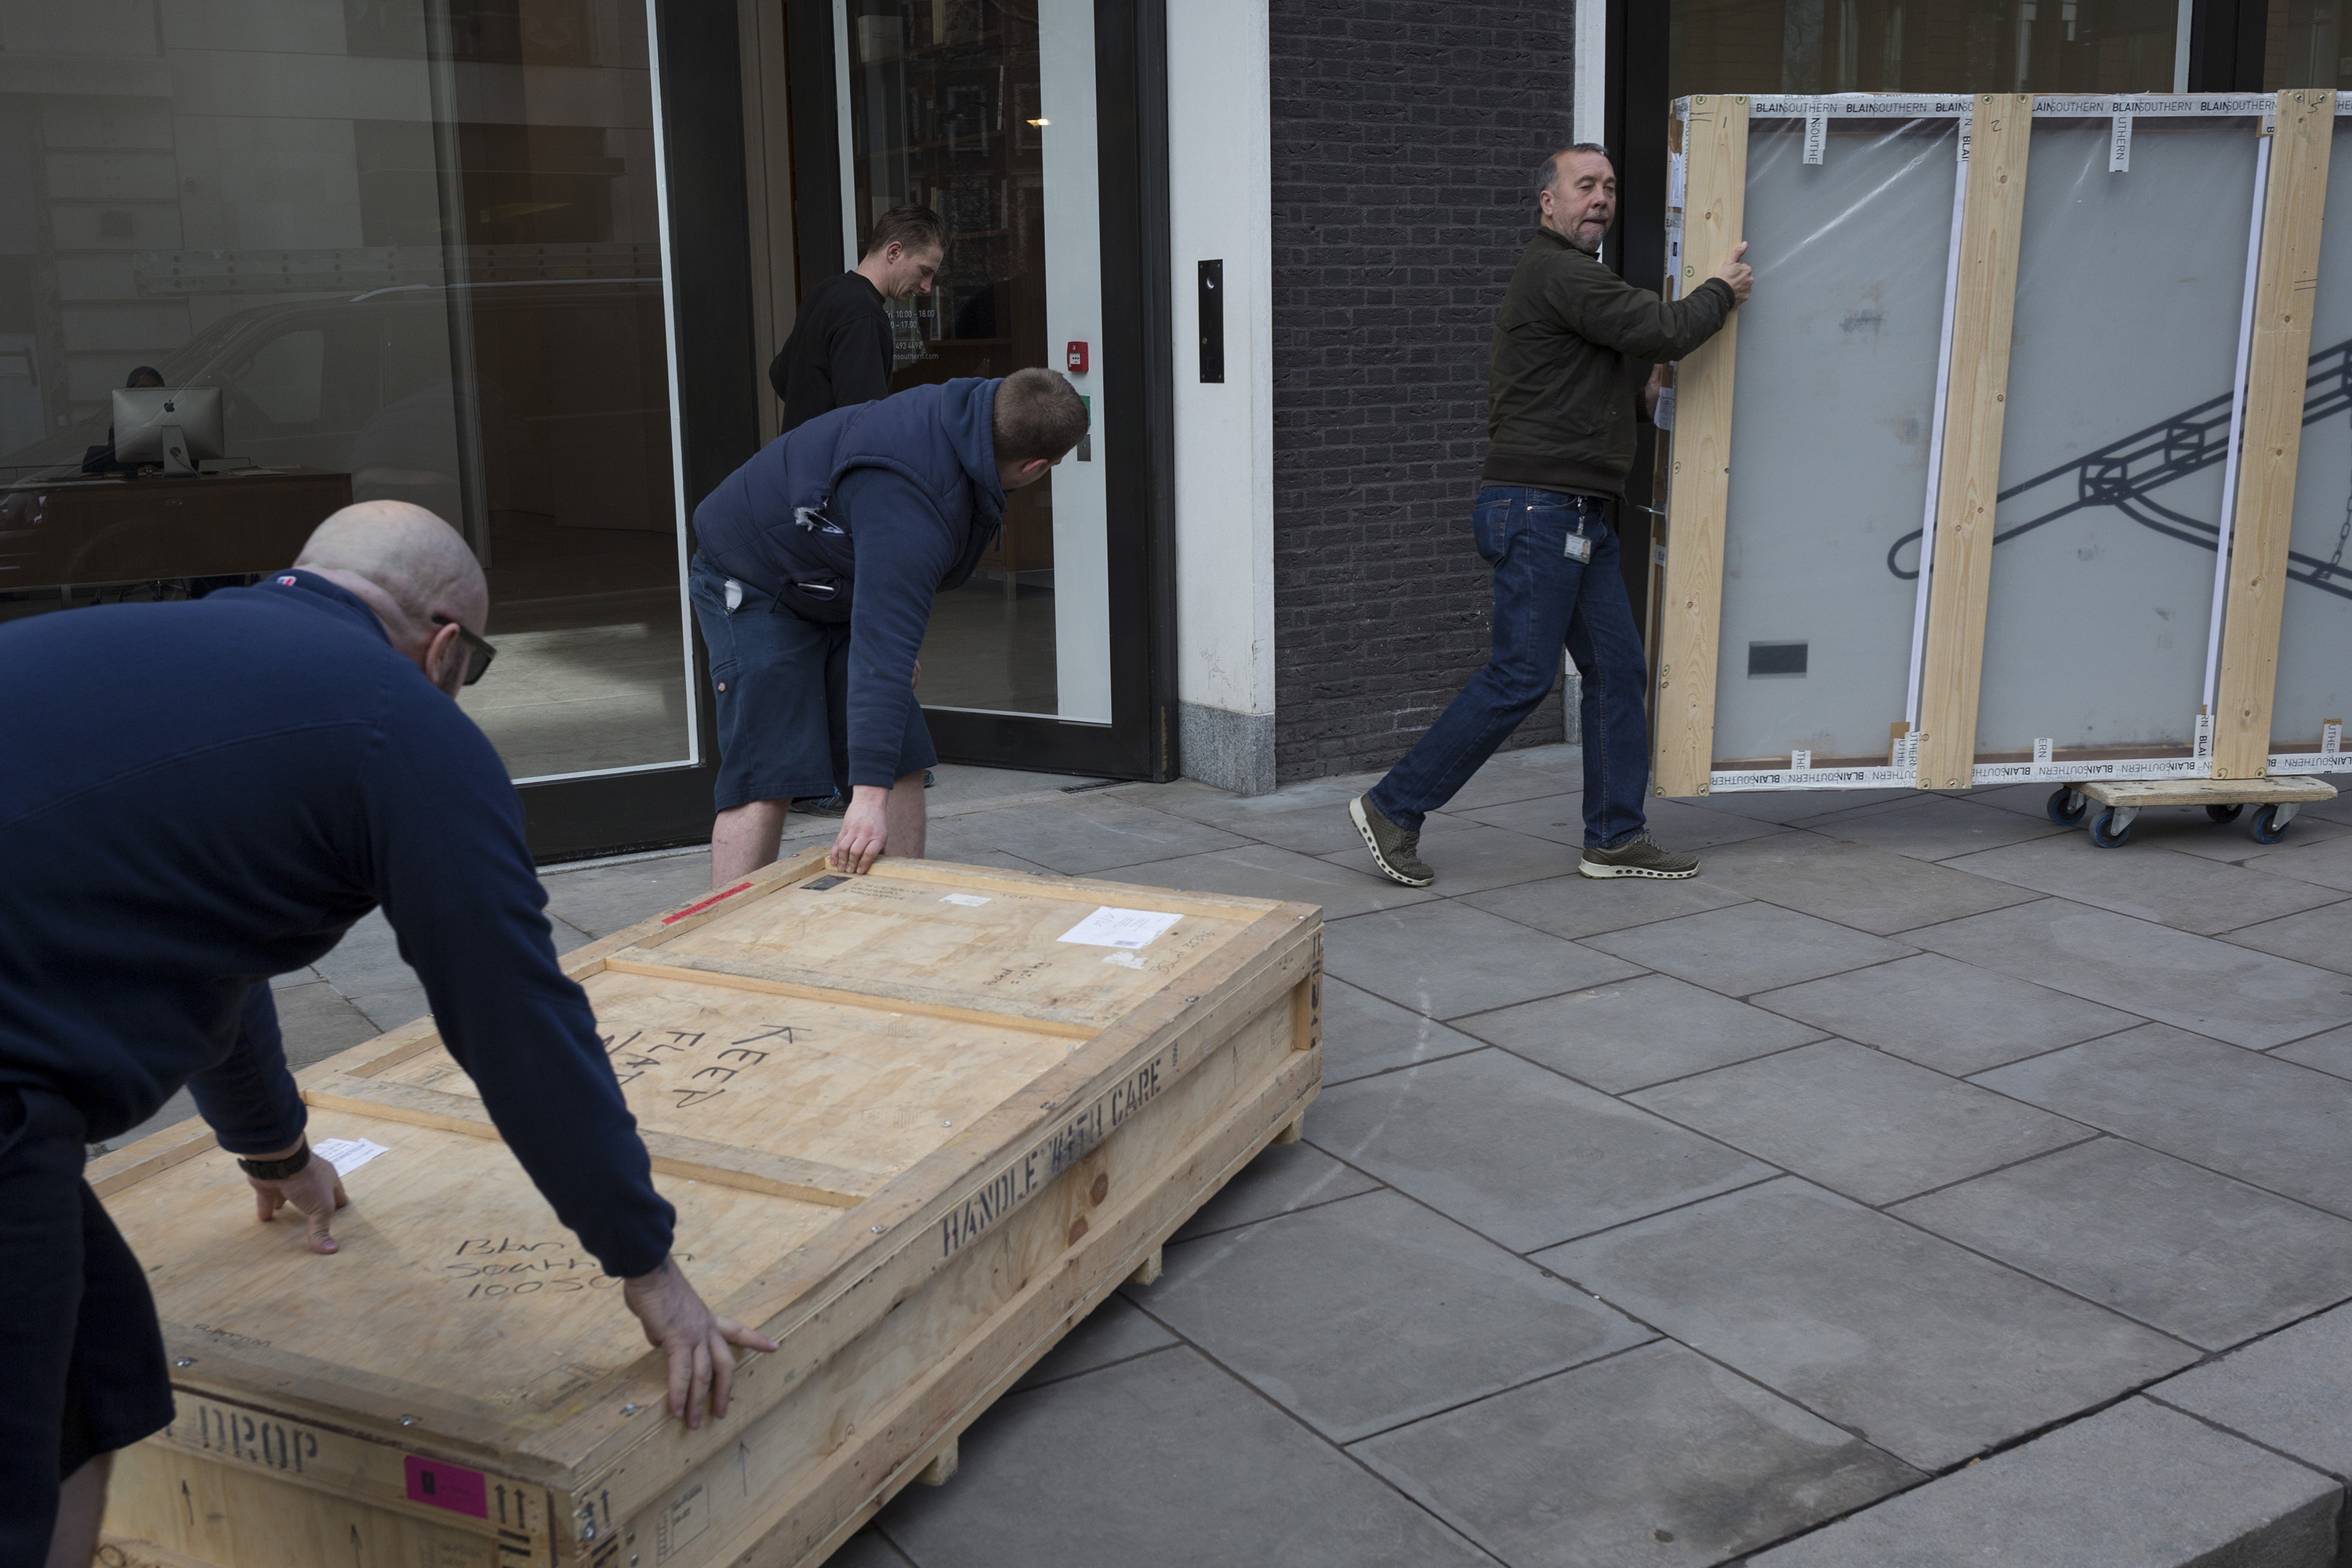 Deliverymen move a flat crate containing artworks in London.